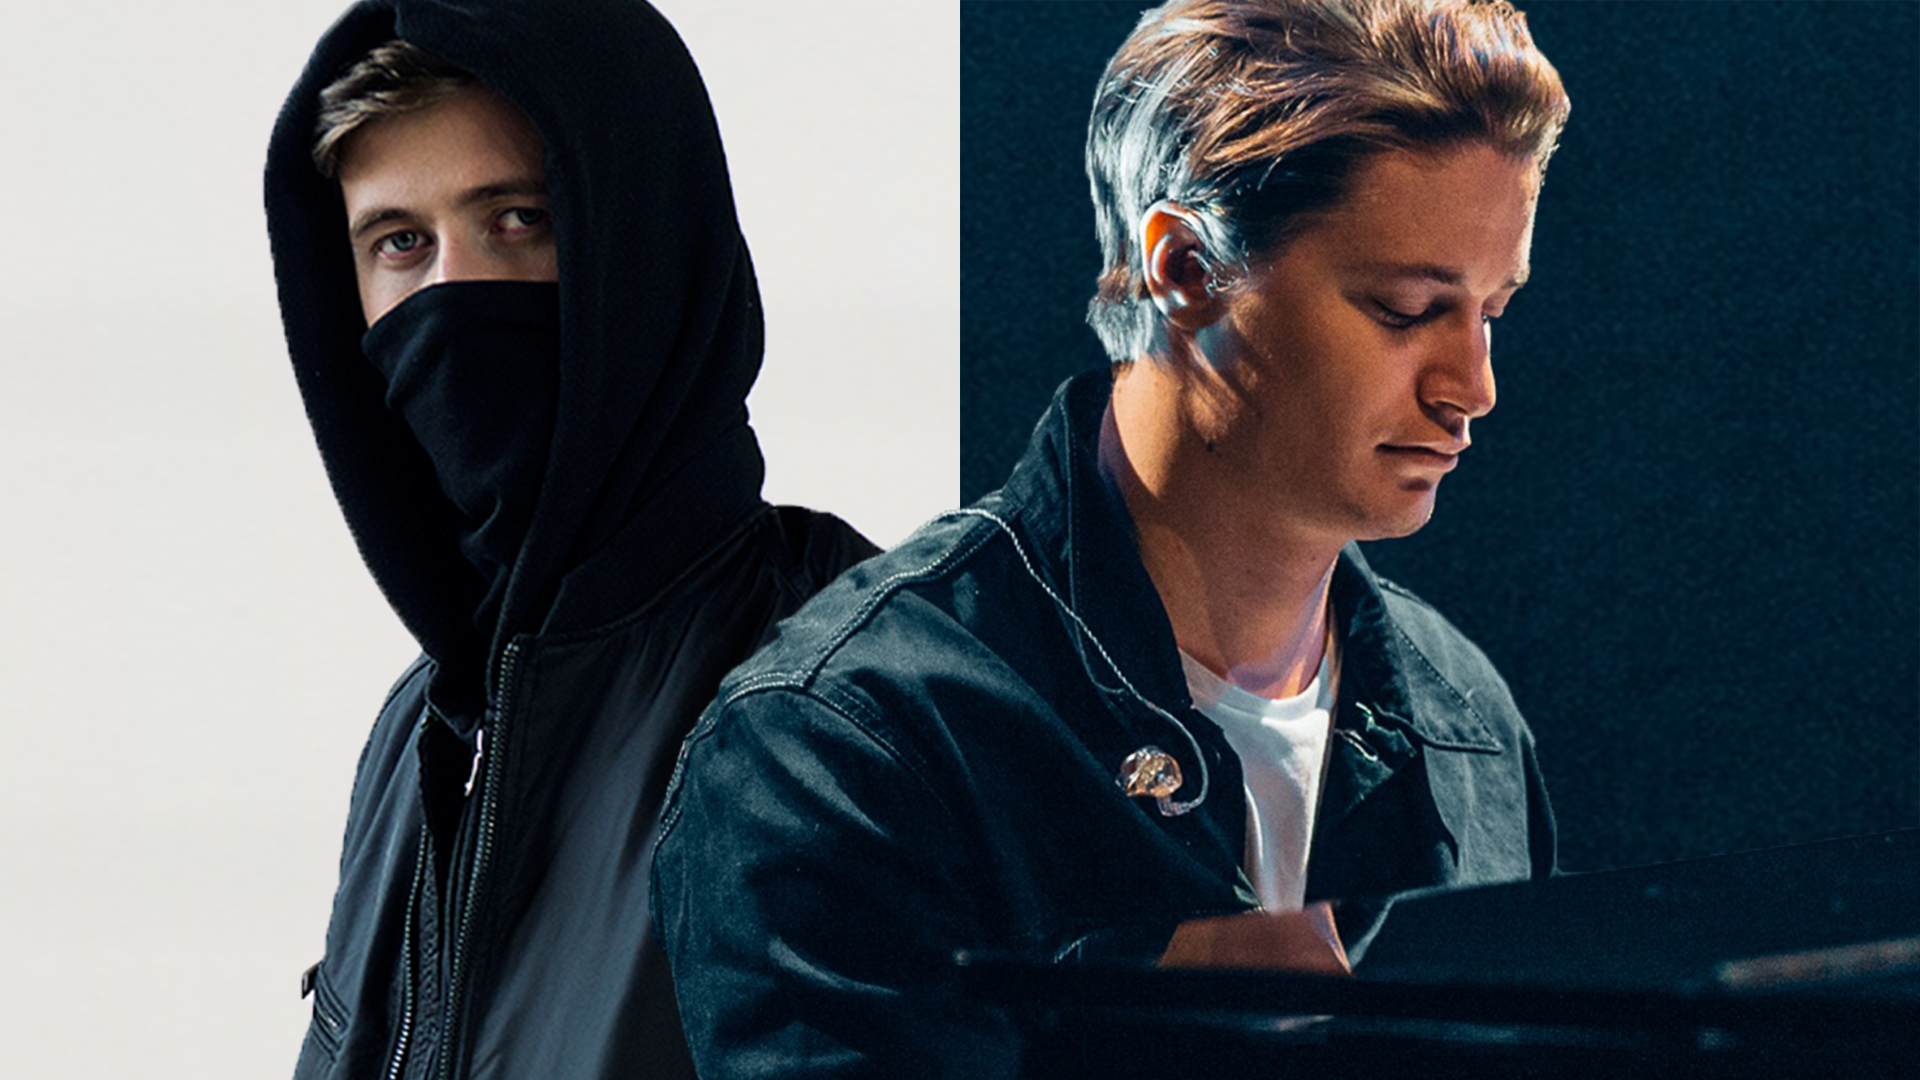 Alan Walker & Kygo join forces for joint world tour